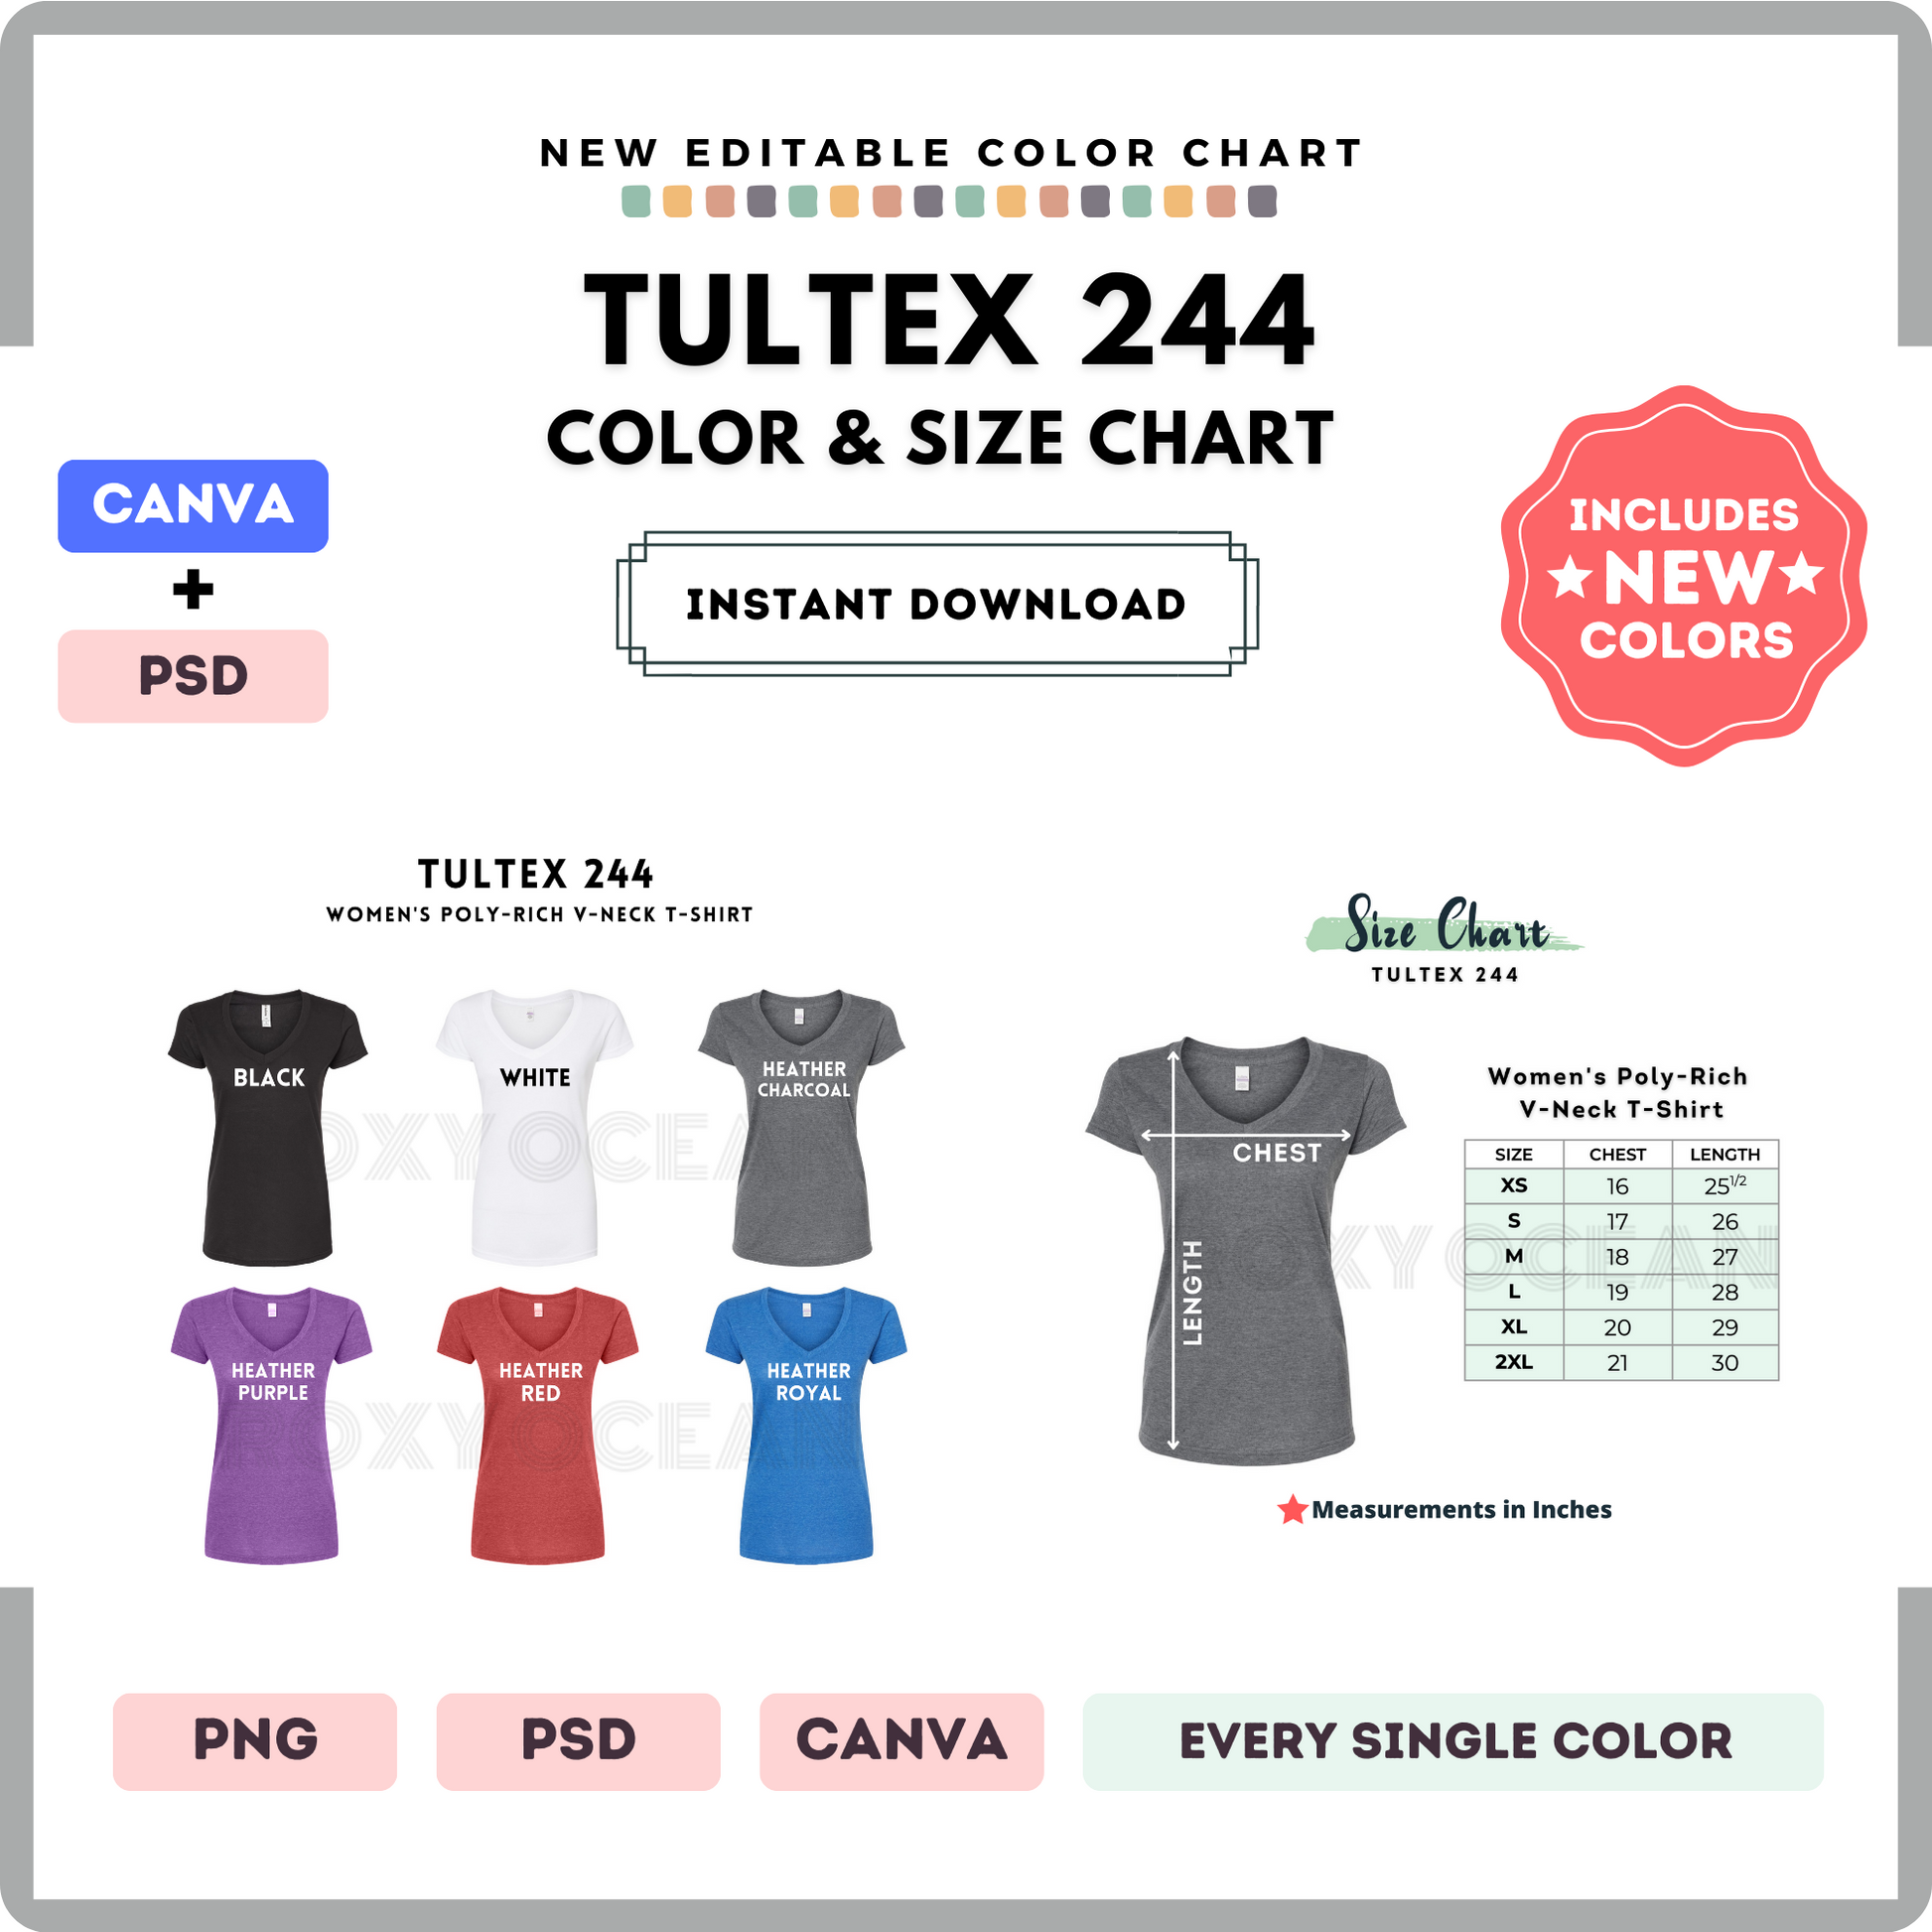 Tultex 244 Color and Size Chart